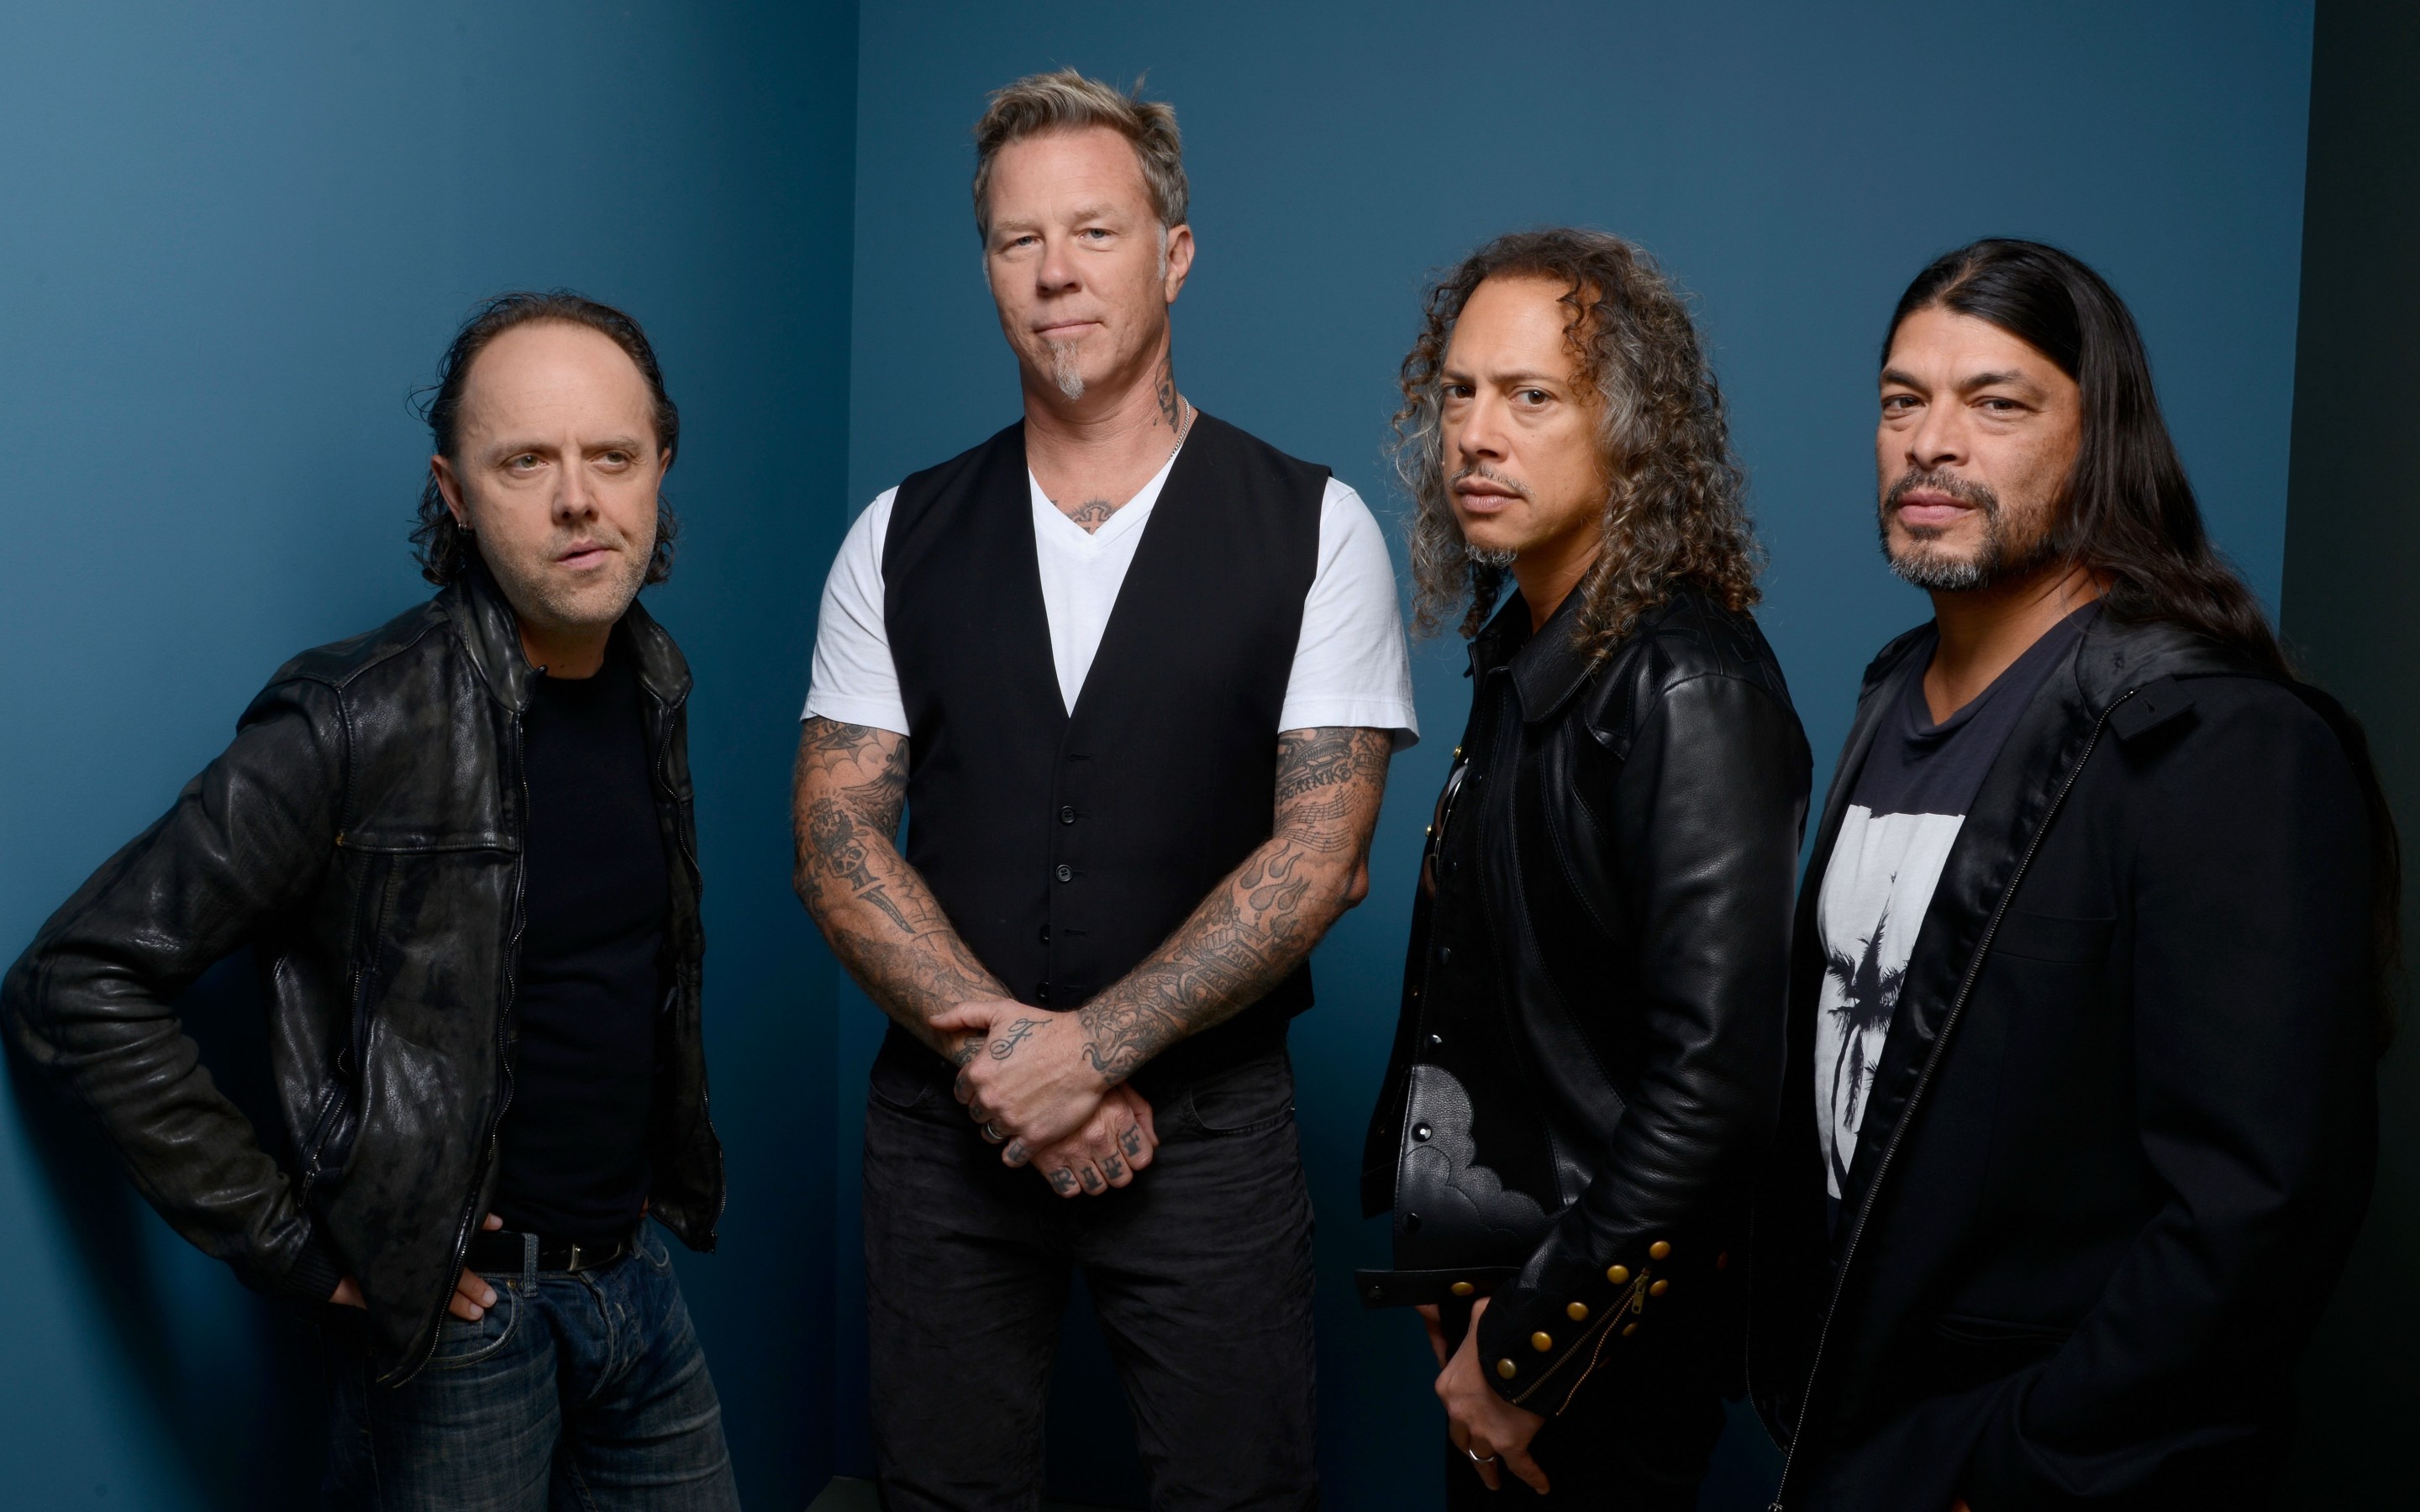 Metallica Wallpapers, Pictures, Images